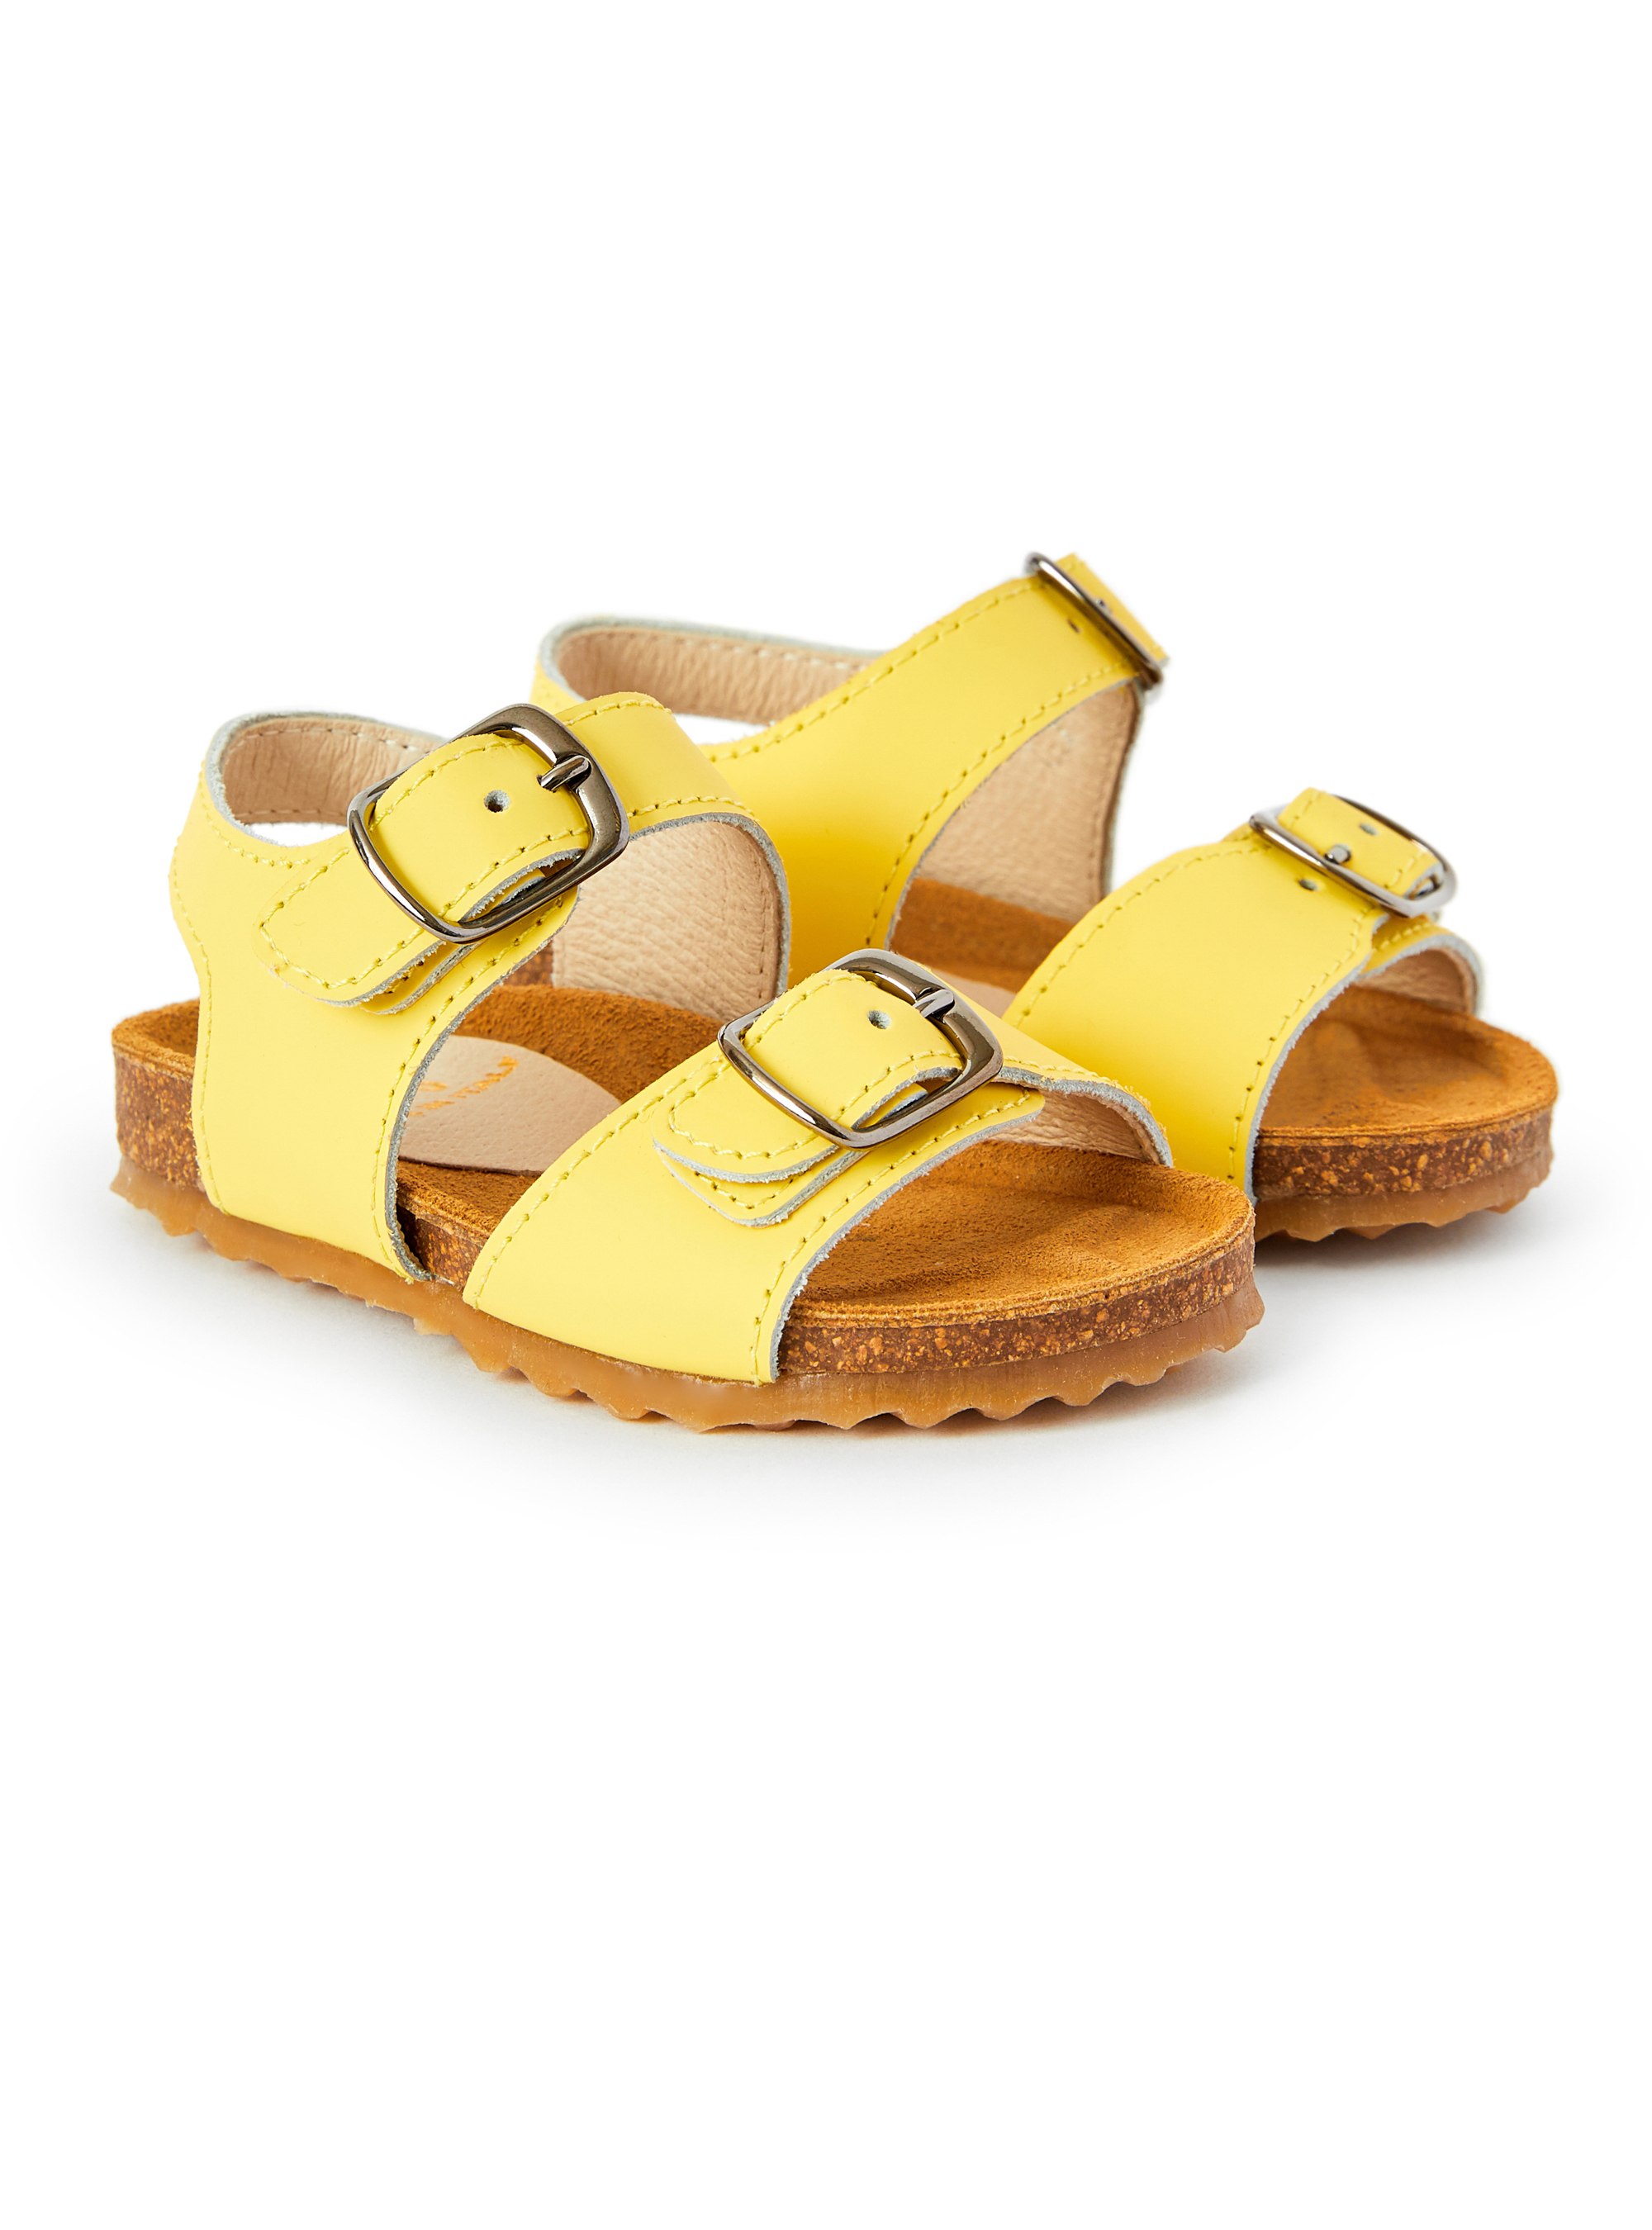 Yellow leather sandal with buckles - Shoes - Il Gufo